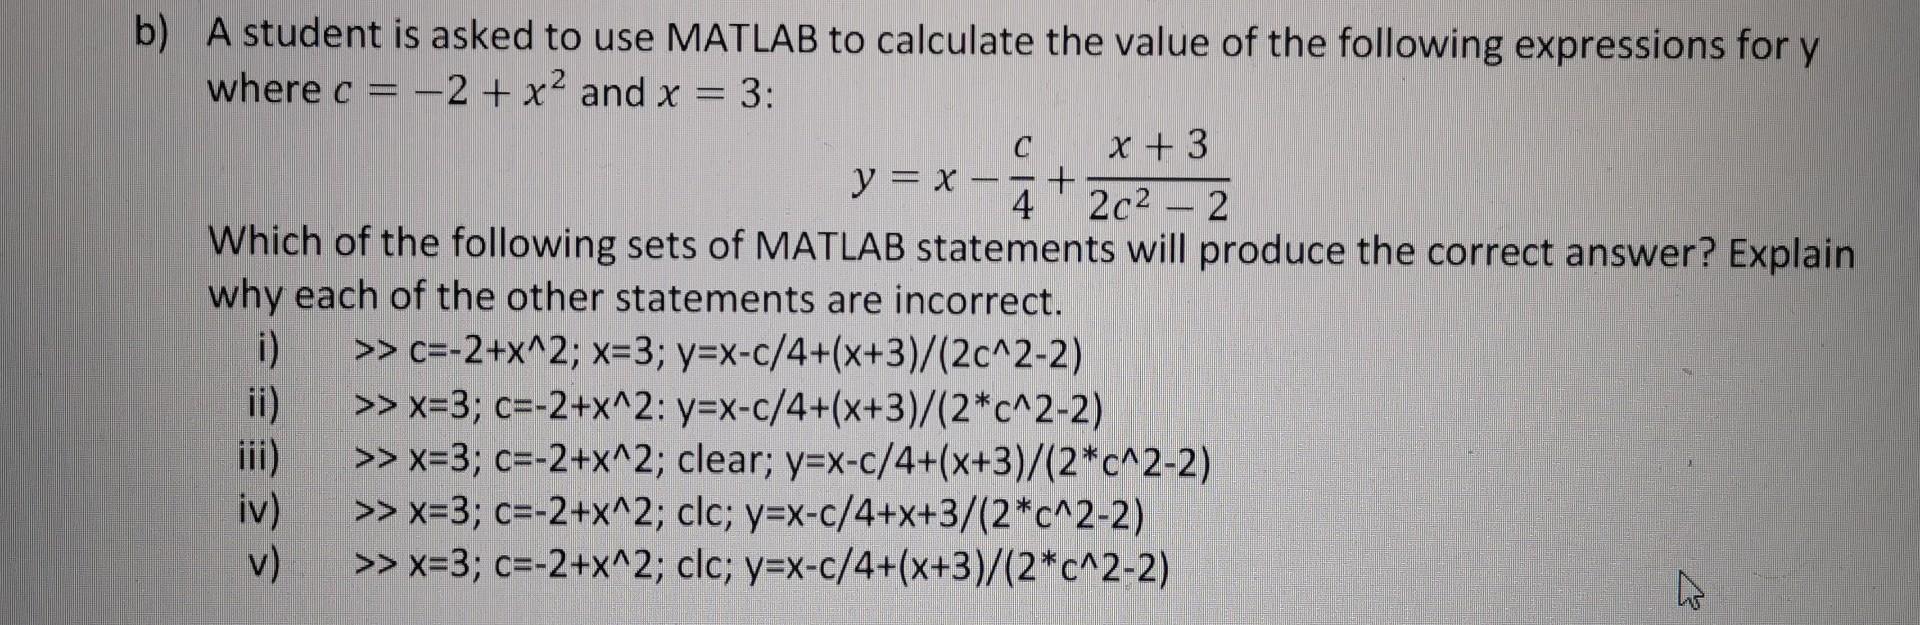 b) A student is asked to use MATLAB to calculate the value of the following expressions for y where c = 2 + x